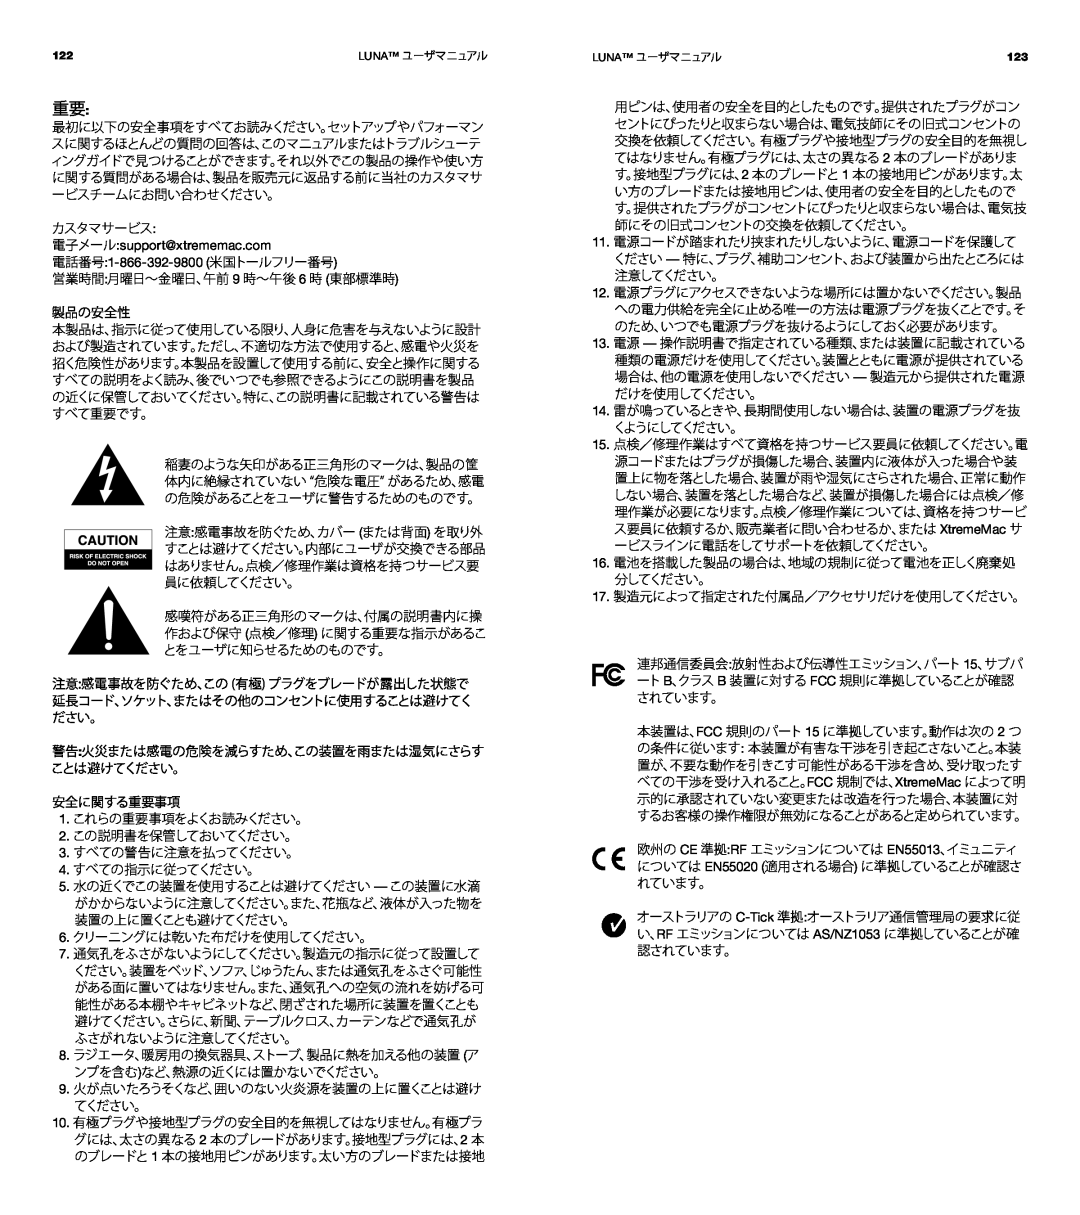 XtremeMac Room Audio System user manual 電子メール:support@xtrememac.com, 電話番号:1-866-392-9800米国トールフリー番号 